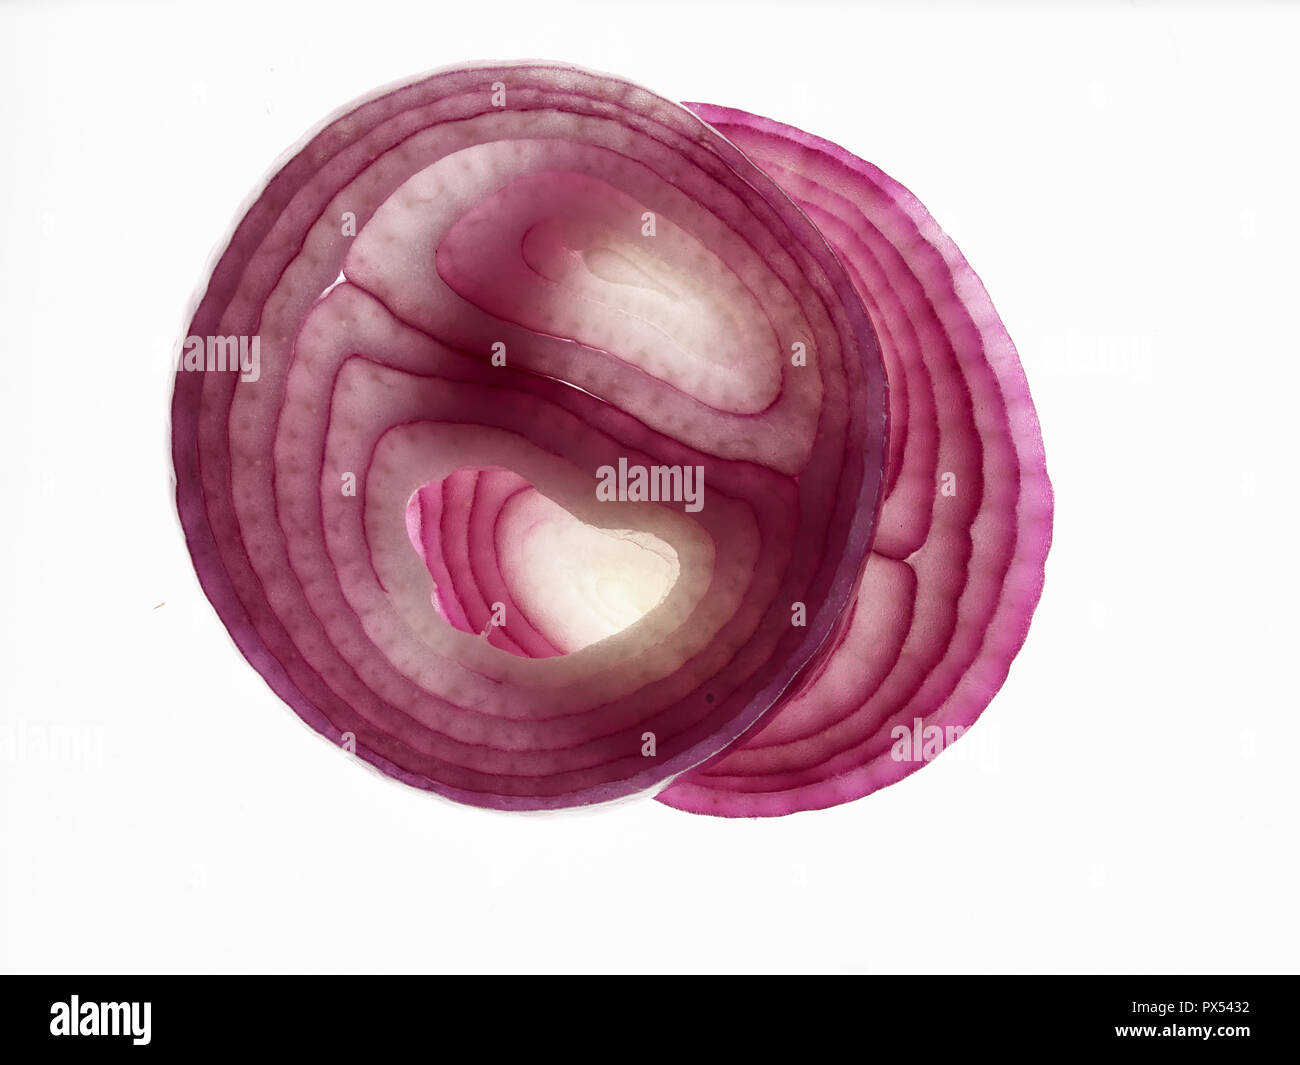 Red onion abstract food photograph Stock Photo